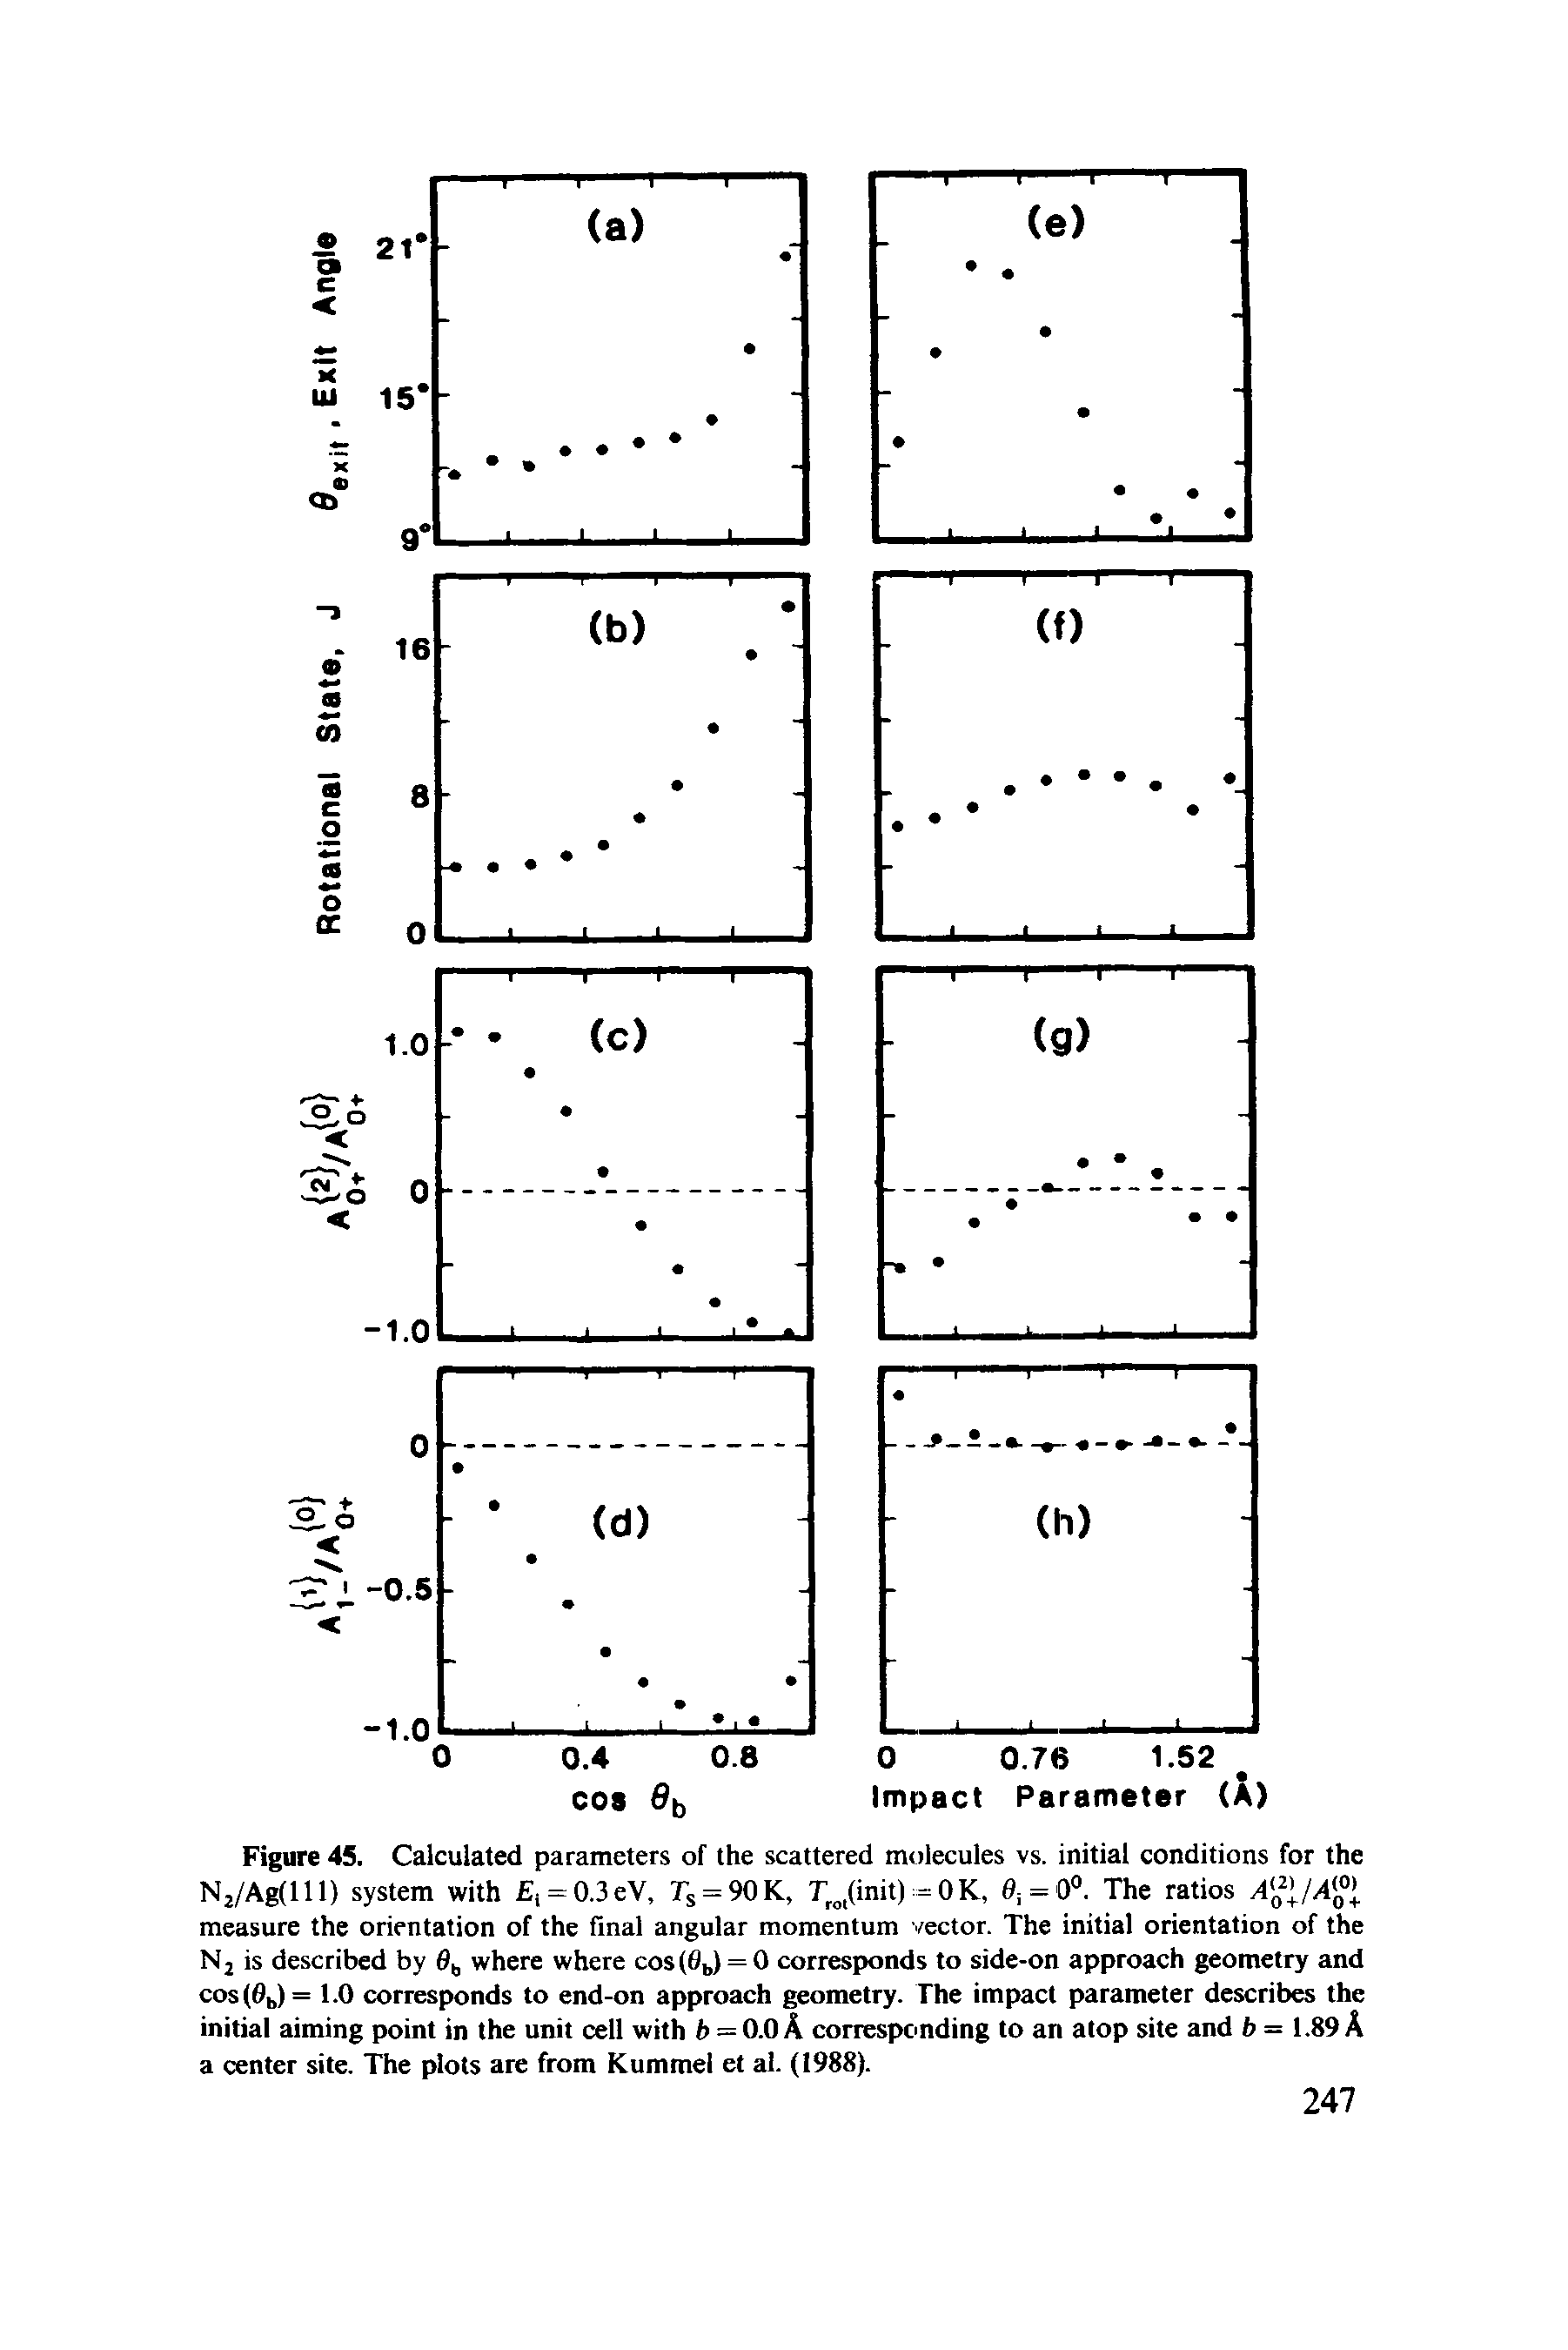 Figure 45. Calculated parameters of the scattered molecules vs. initial conditions for the Nj/Ag(lll) system with i = 0.3eV, Ts = 90K, rjinit) =0K, ei = 0 . The ratios measure the orientation of the final angular momentum vector. The initial orientation of the Nj is described by 6 where where cos(6b) = 0 corresponds to side-on approach geometry and cos (0b) = 1.0 corresponds to end-on approach geometry. The impact parameter describes the initial aiming point in the unit cell with 6 = 0.0 A corresponding to an atop site and fc = 1.89 A a center site. The plots are from Kummel et al. (1988).